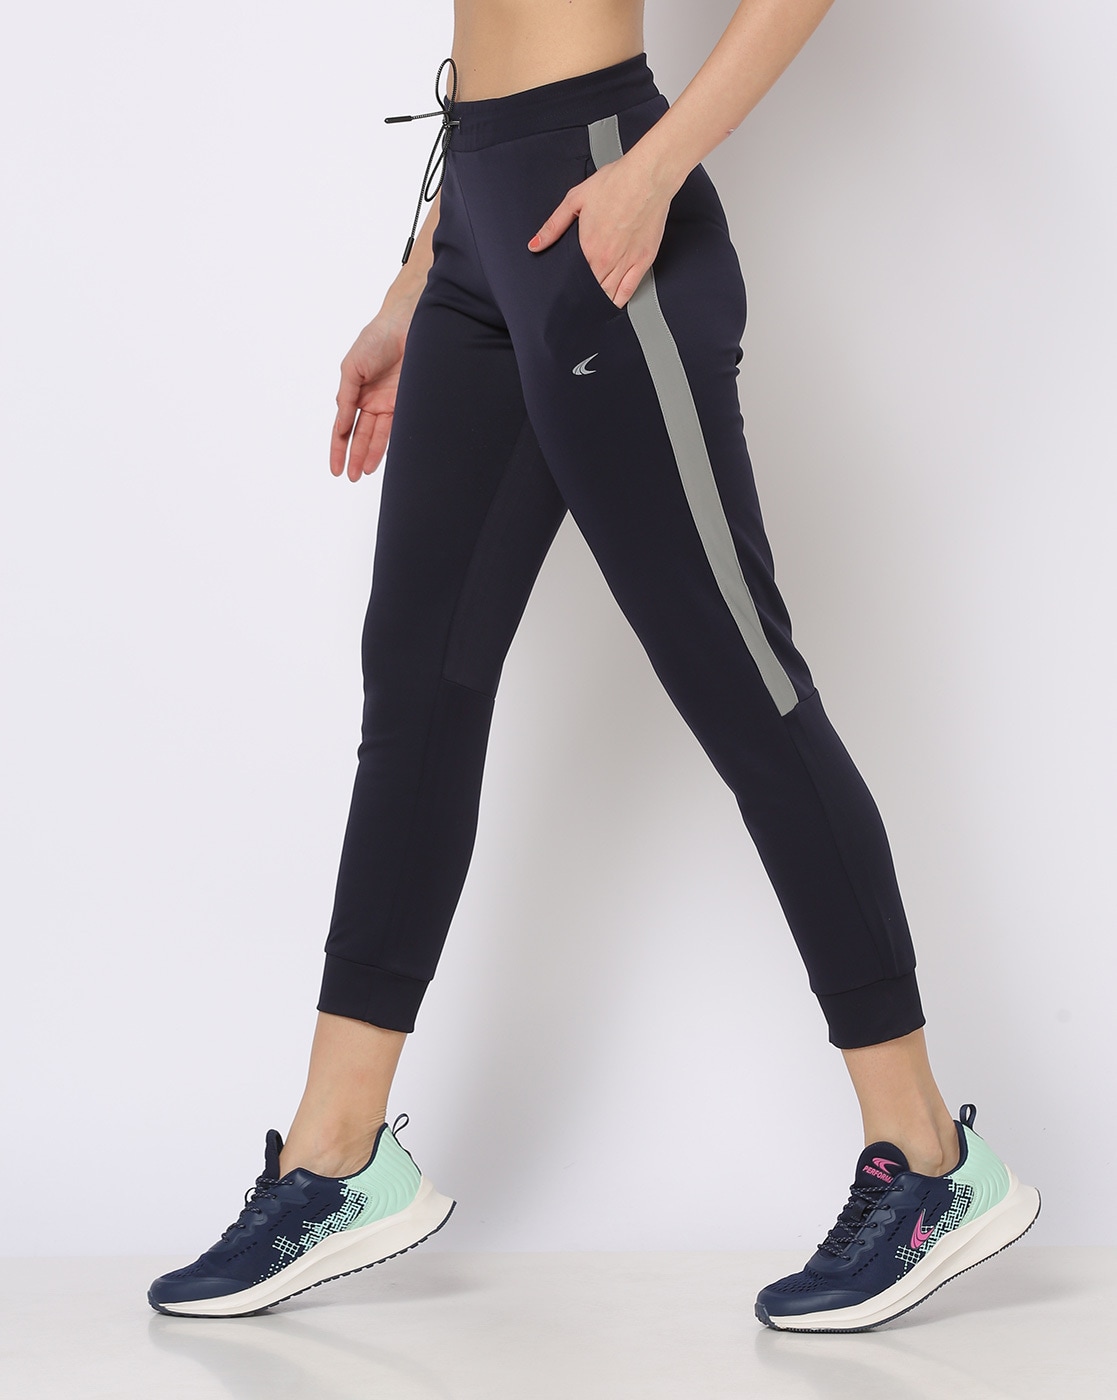 Women Yoga Gym Loose Pants Fitness Running Breathable Trousers Workout  Clothes Sportspants Elastic Waist Pant With Pockets